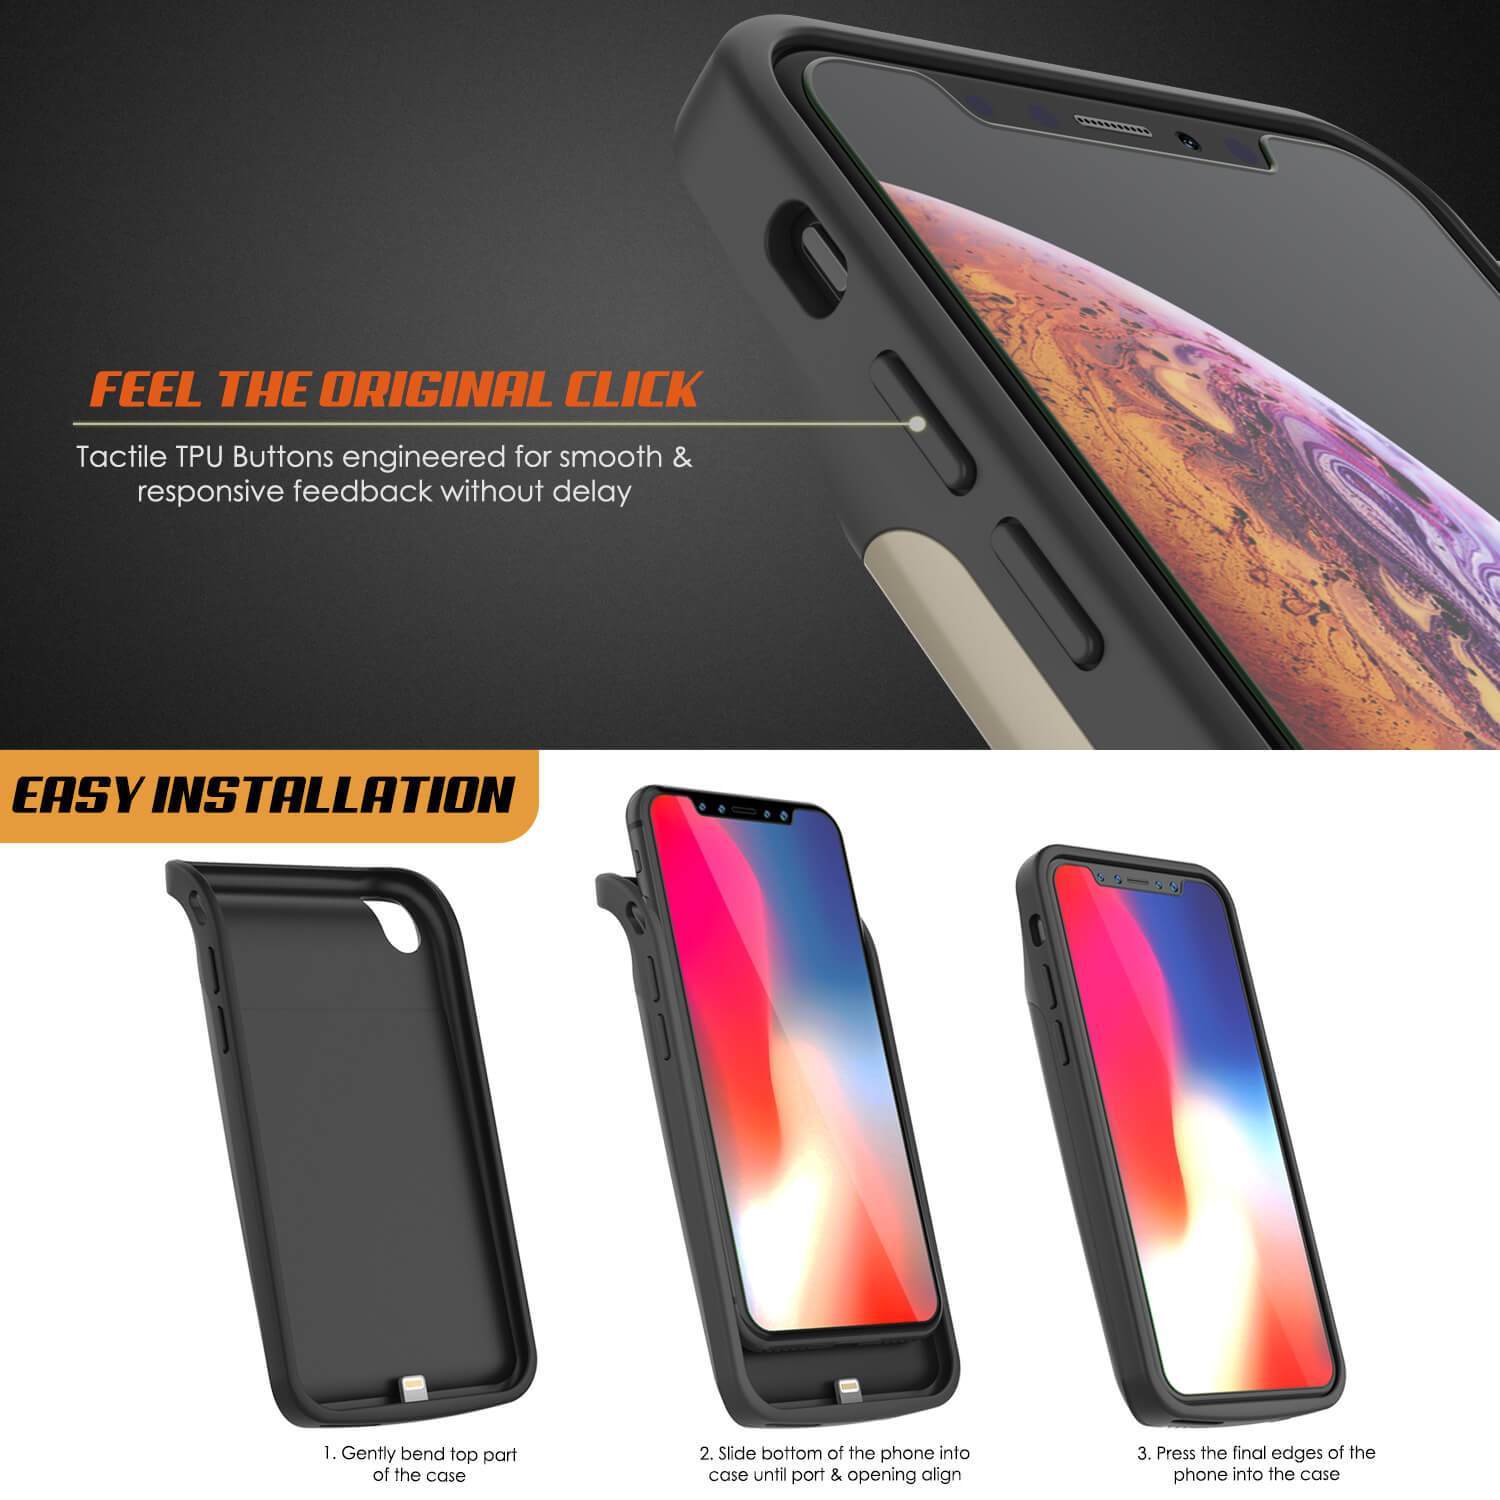 iPhone 11 Battery Case, PunkJuice 5000mAH Fast Charging Power Bank W/ Screen Protector | [Gold]